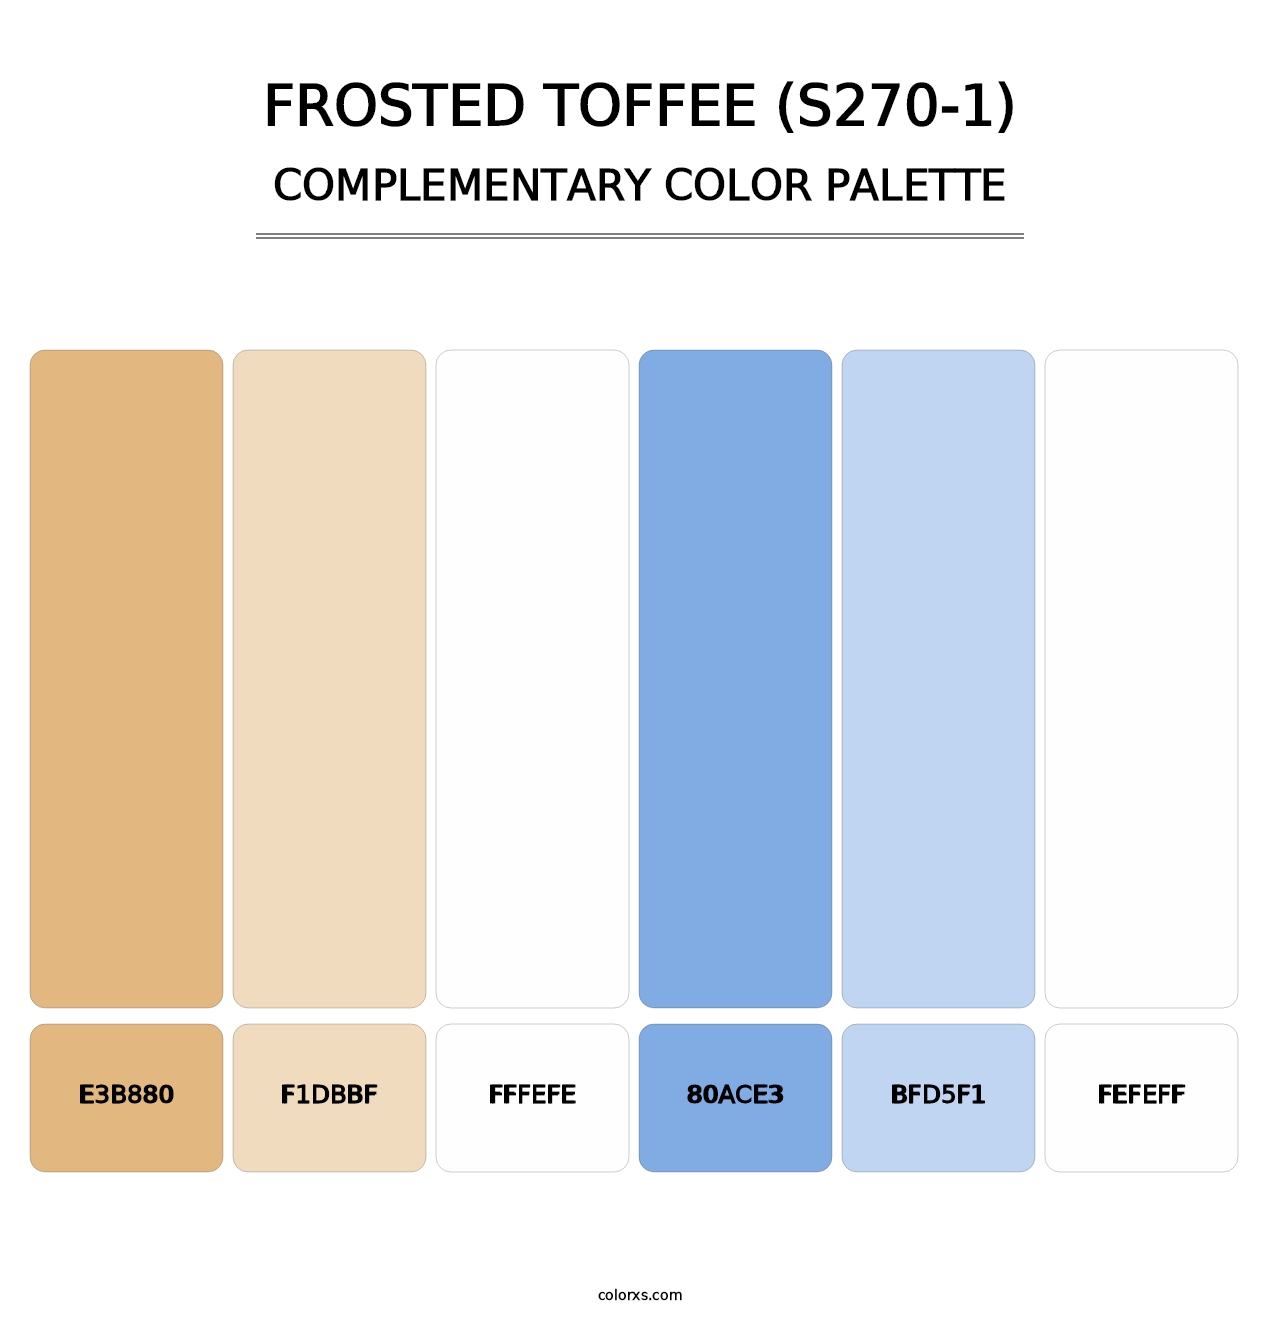 Frosted Toffee (S270-1) - Complementary Color Palette